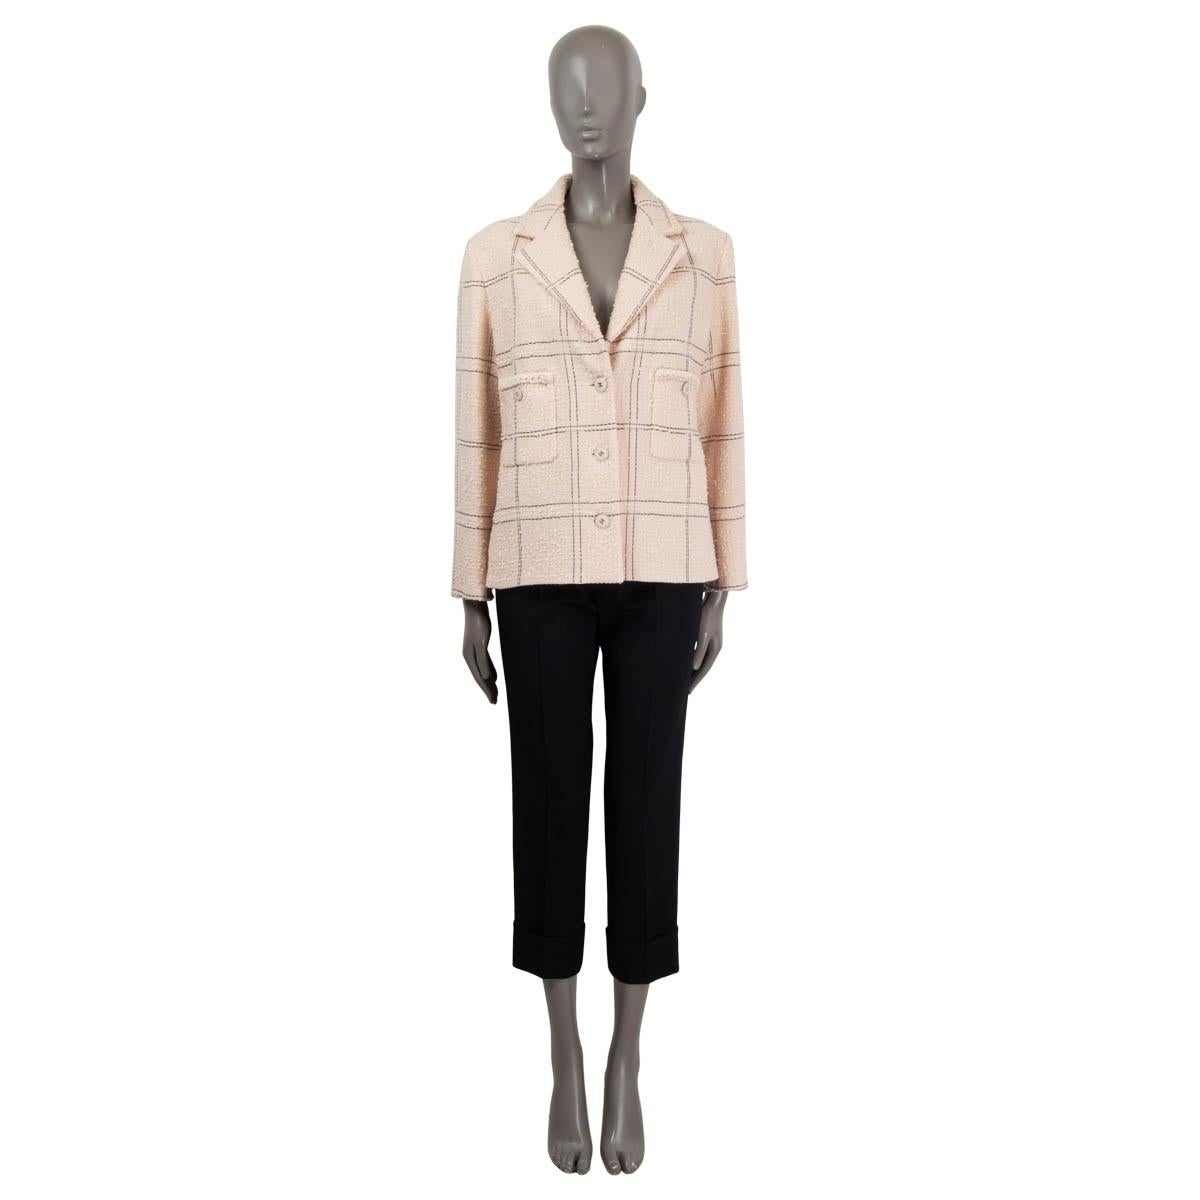 100% authentic Chanel 2021 plaid tweed jacket in light pink, ivory and black wool (76%), acrylic (22%), polyester (1%) and polyamide (1%). Opens with three logo embellished buttons in light pink and silver to a light pink lining in silk (100%). The